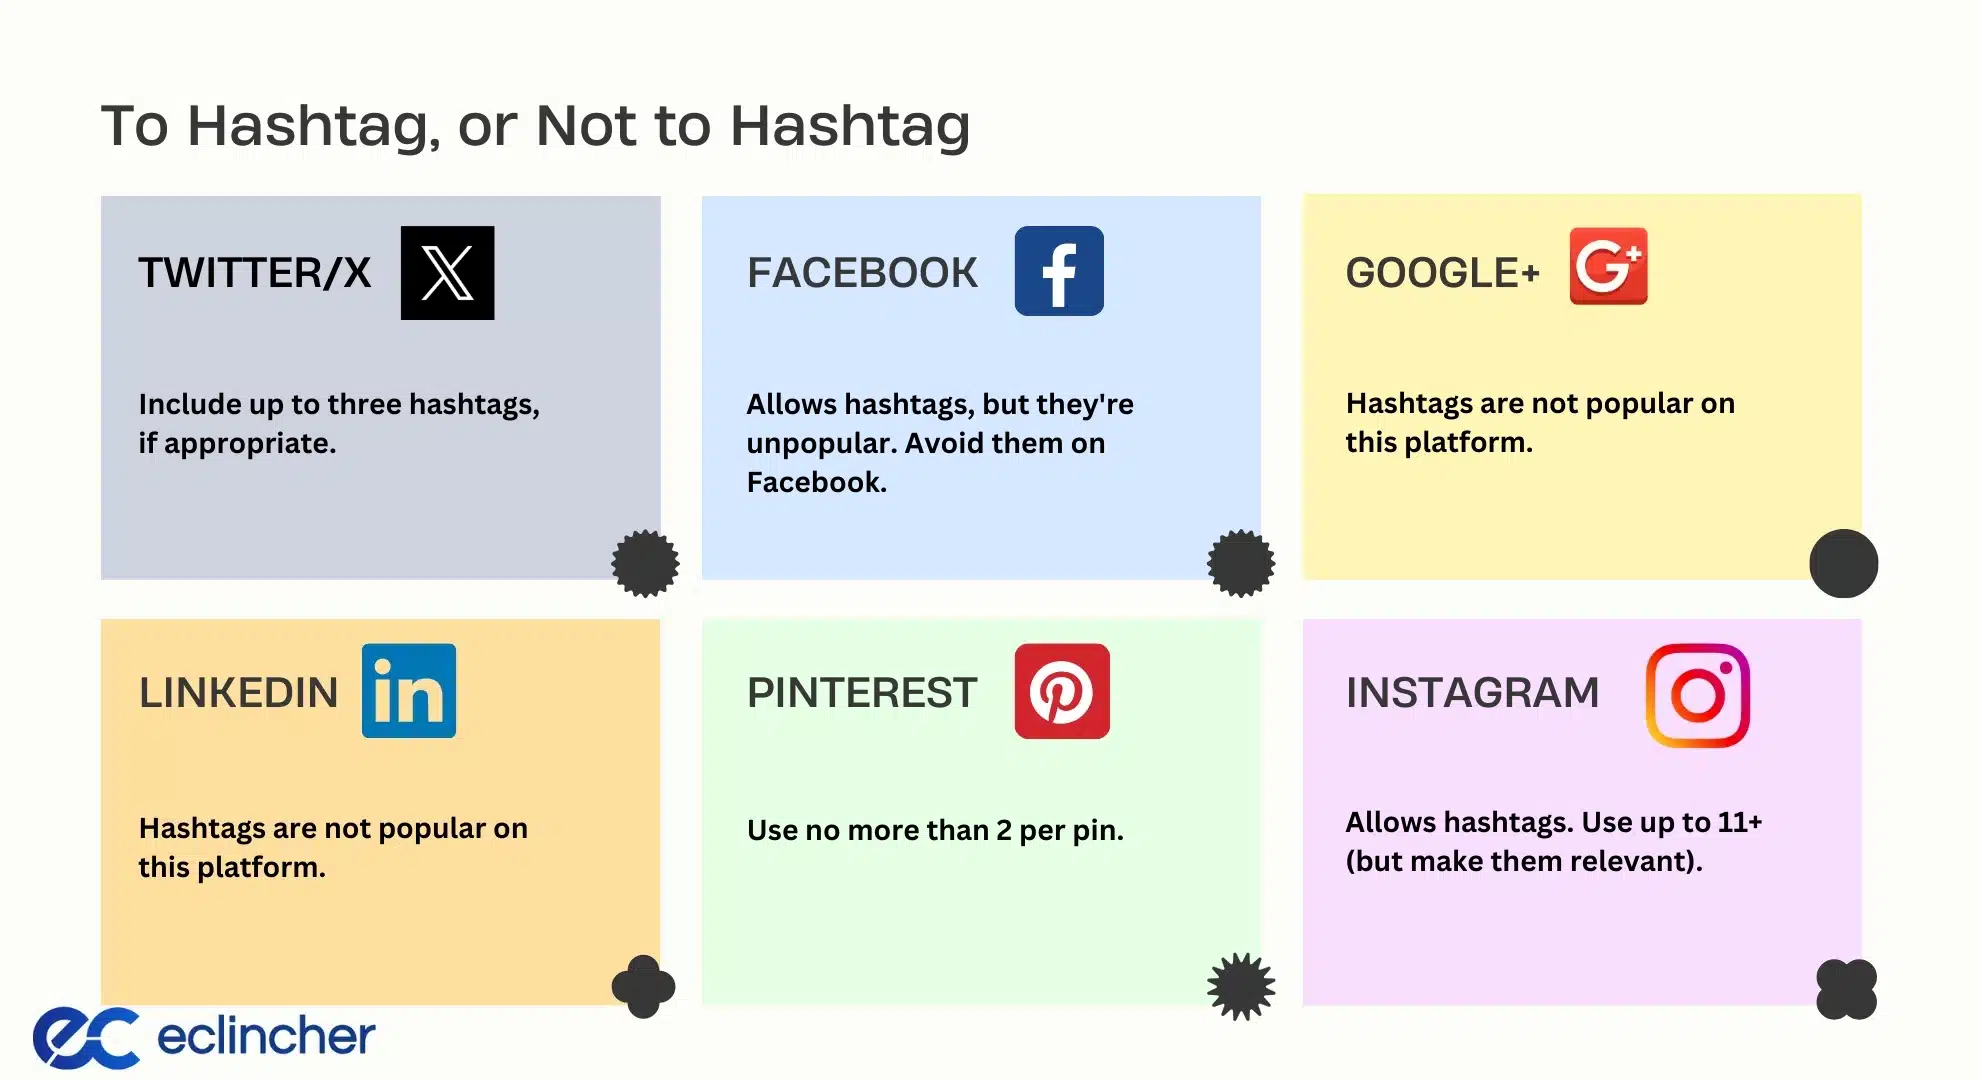 To Hashtag, or Not to Hashtag